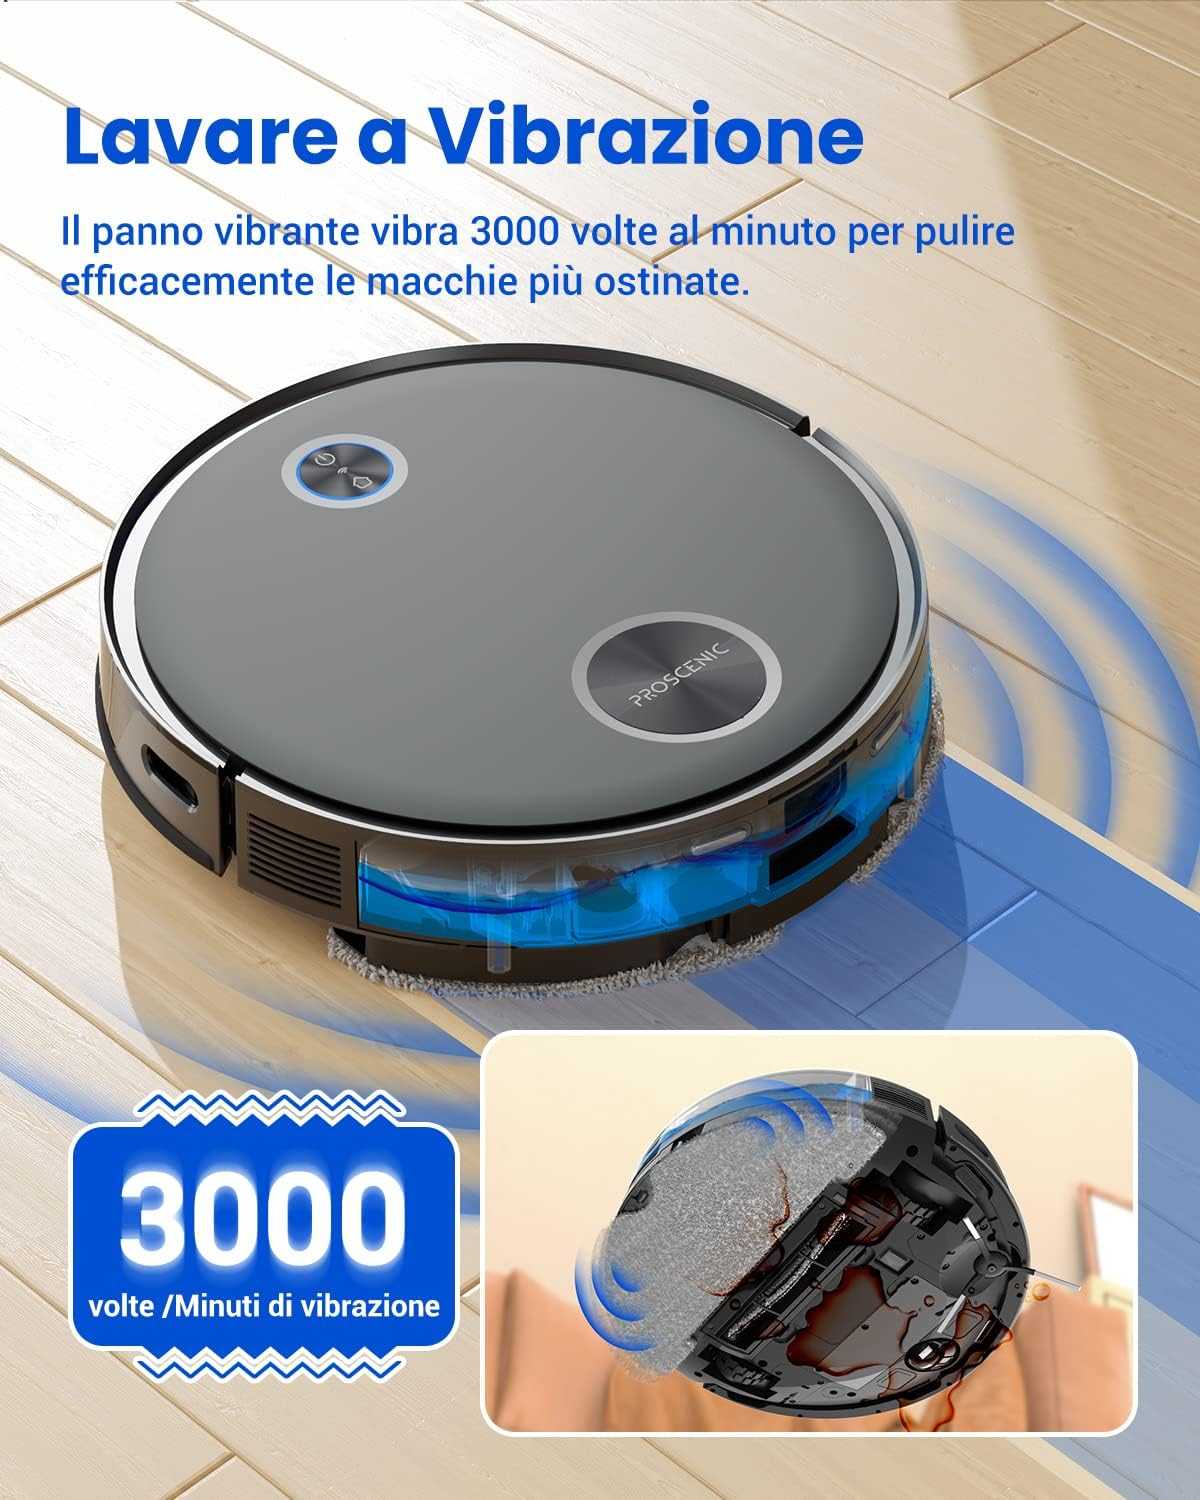 Proscenic: presented the new Floobot X1 and V10 robot vacuum cleaners